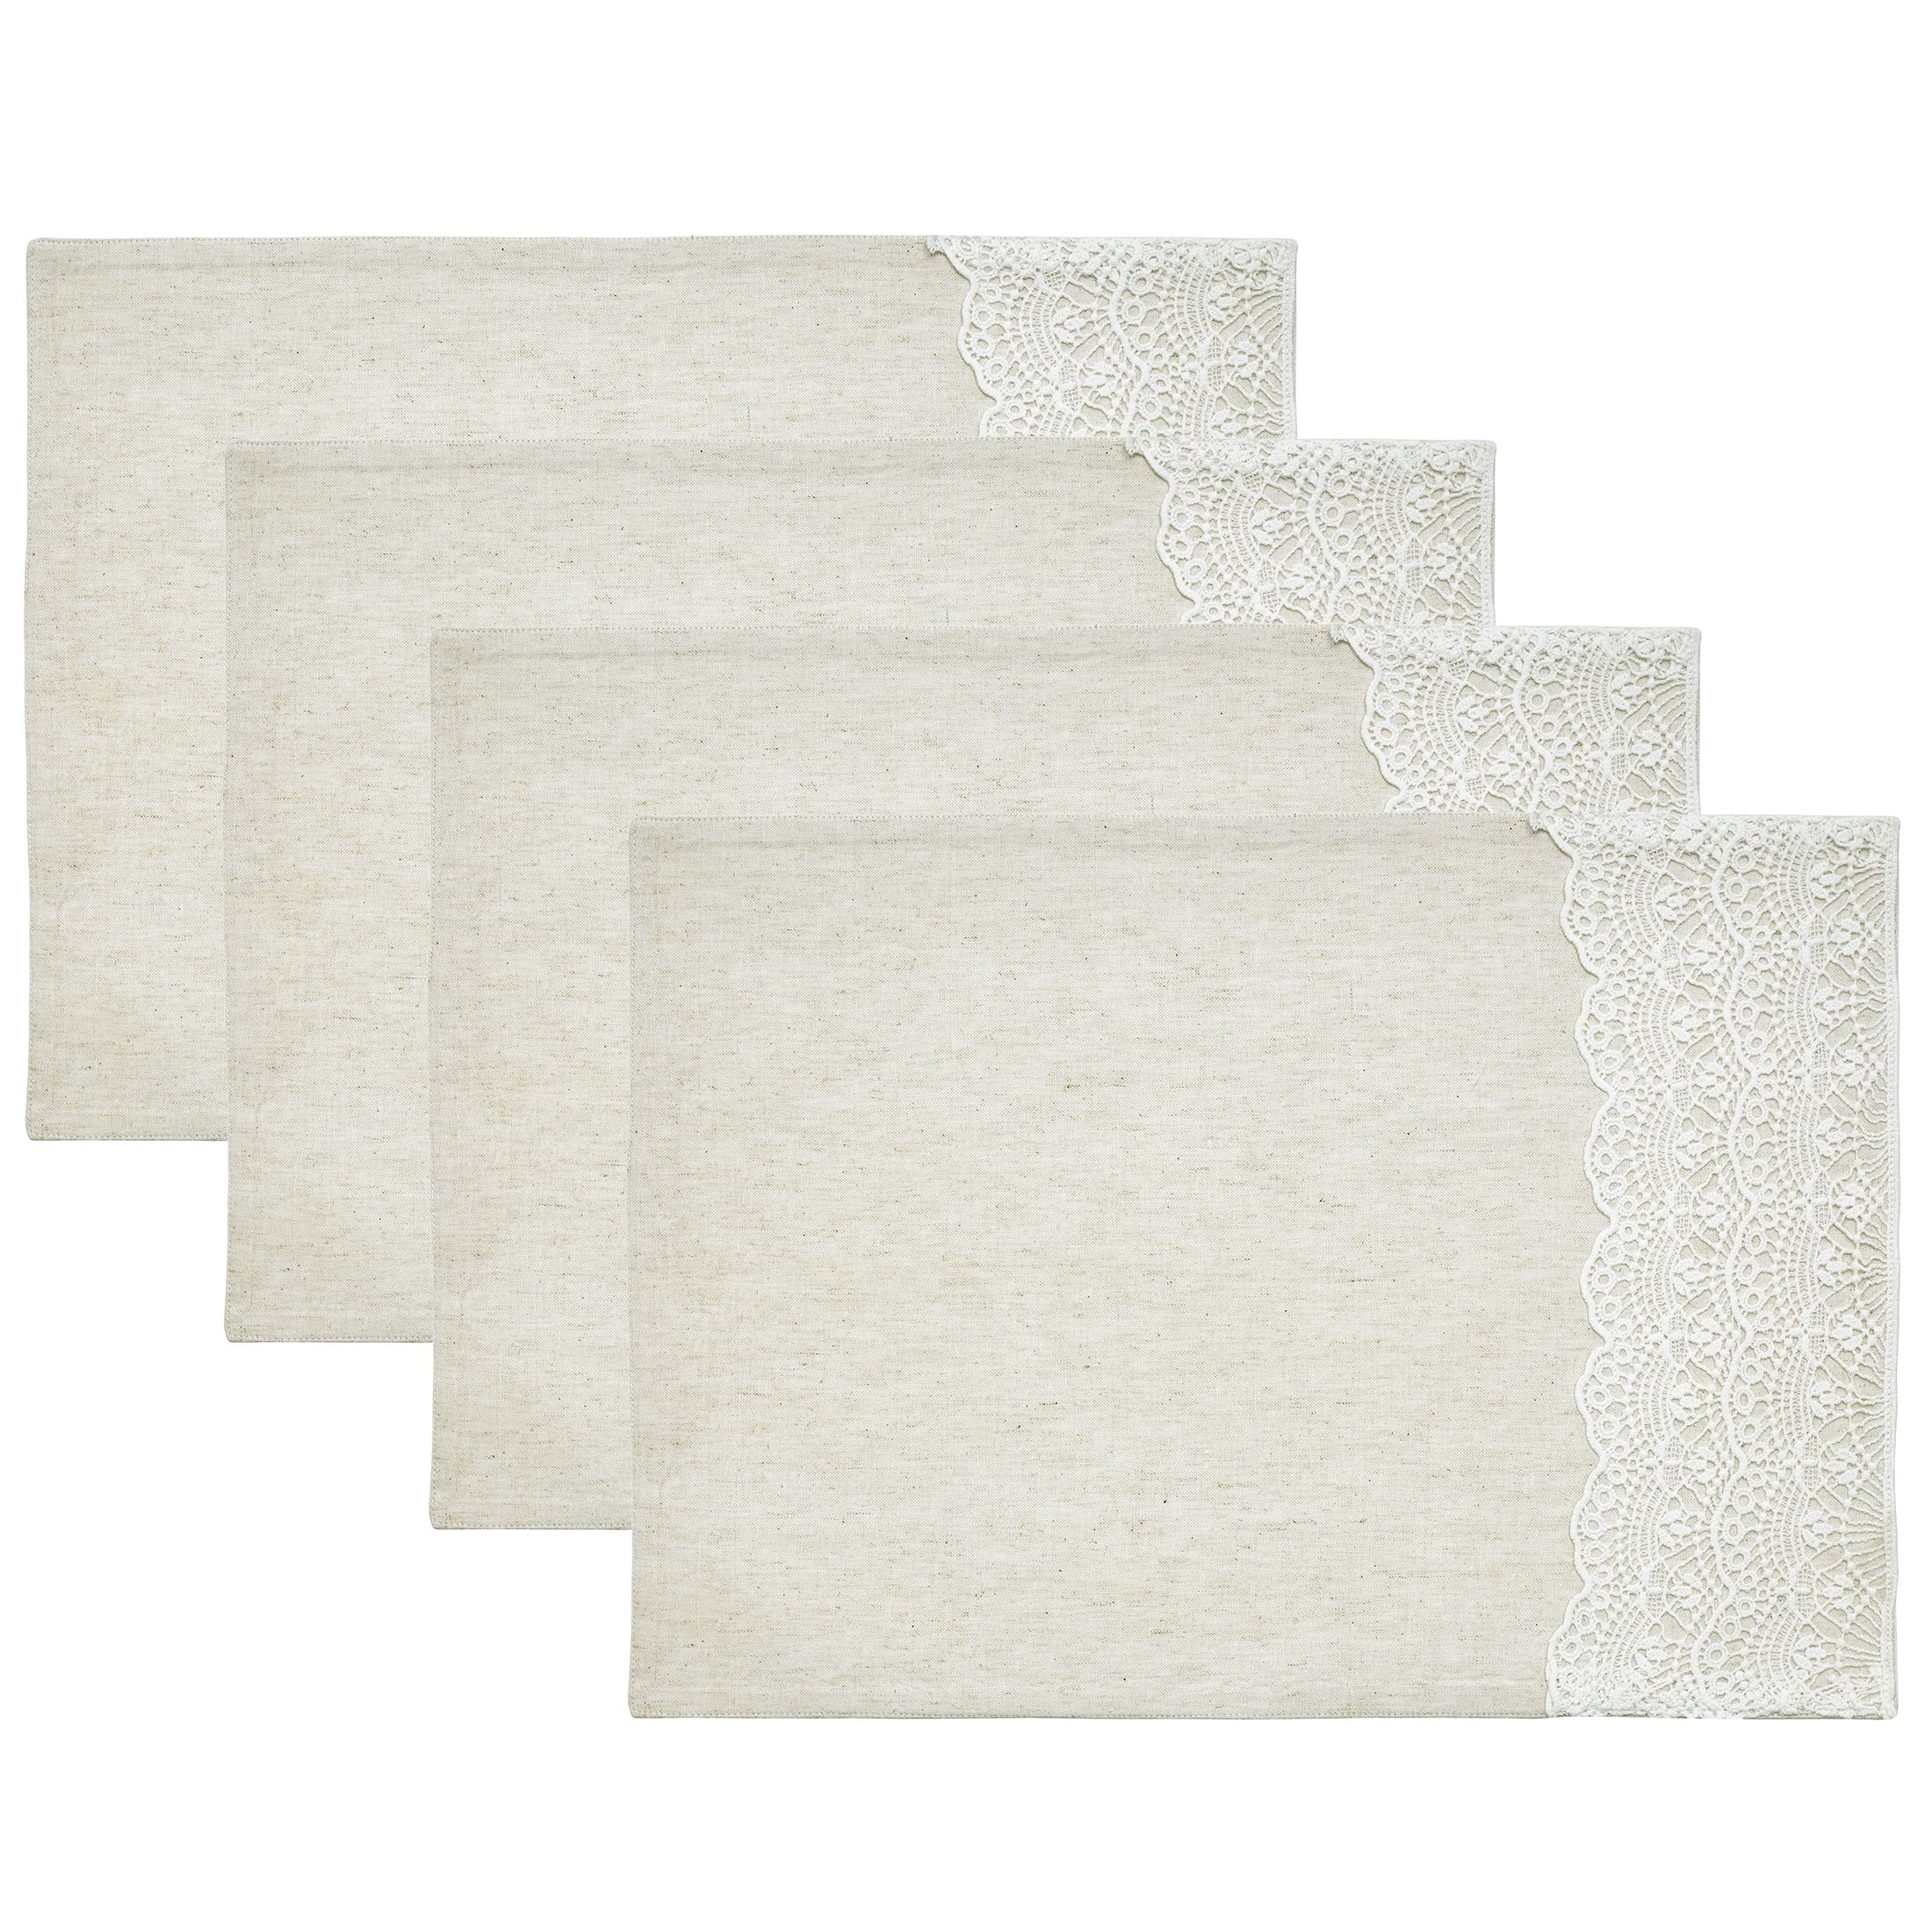 My Texas House Adalee Lace Cotton/Linen 14" x 20" Placemats, 4 Pack, Beige | Walmart (US)